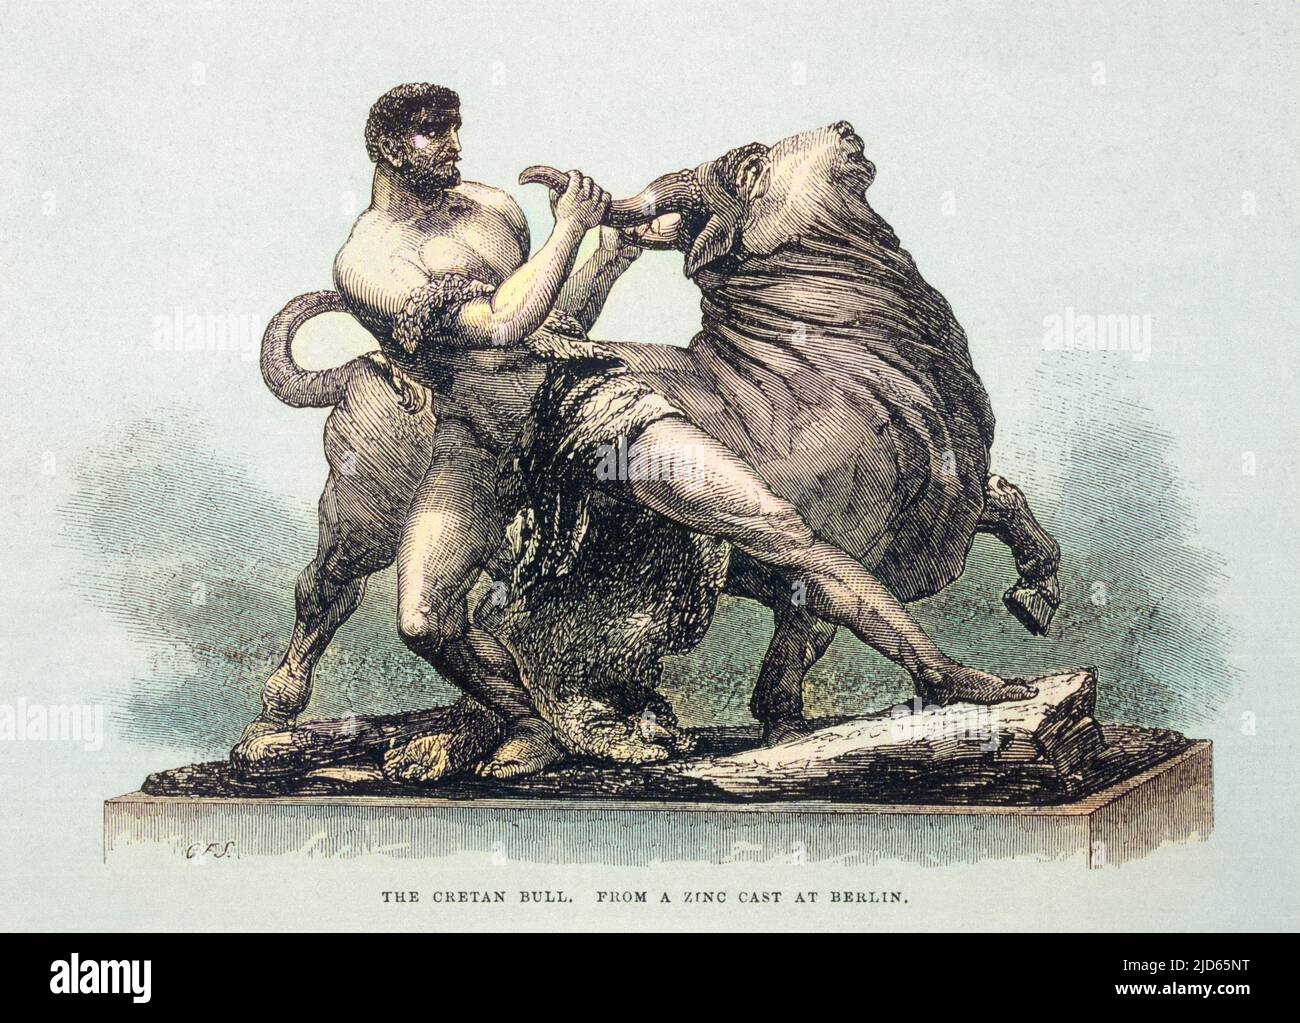 Hercules captures the Cretan Bull which was given to King Minos by Poseidon. (The Minotaur was the offspring of the wife of King Minos and the Cretan bull she so admired). Colourised version of : 10002541 Stock Photo